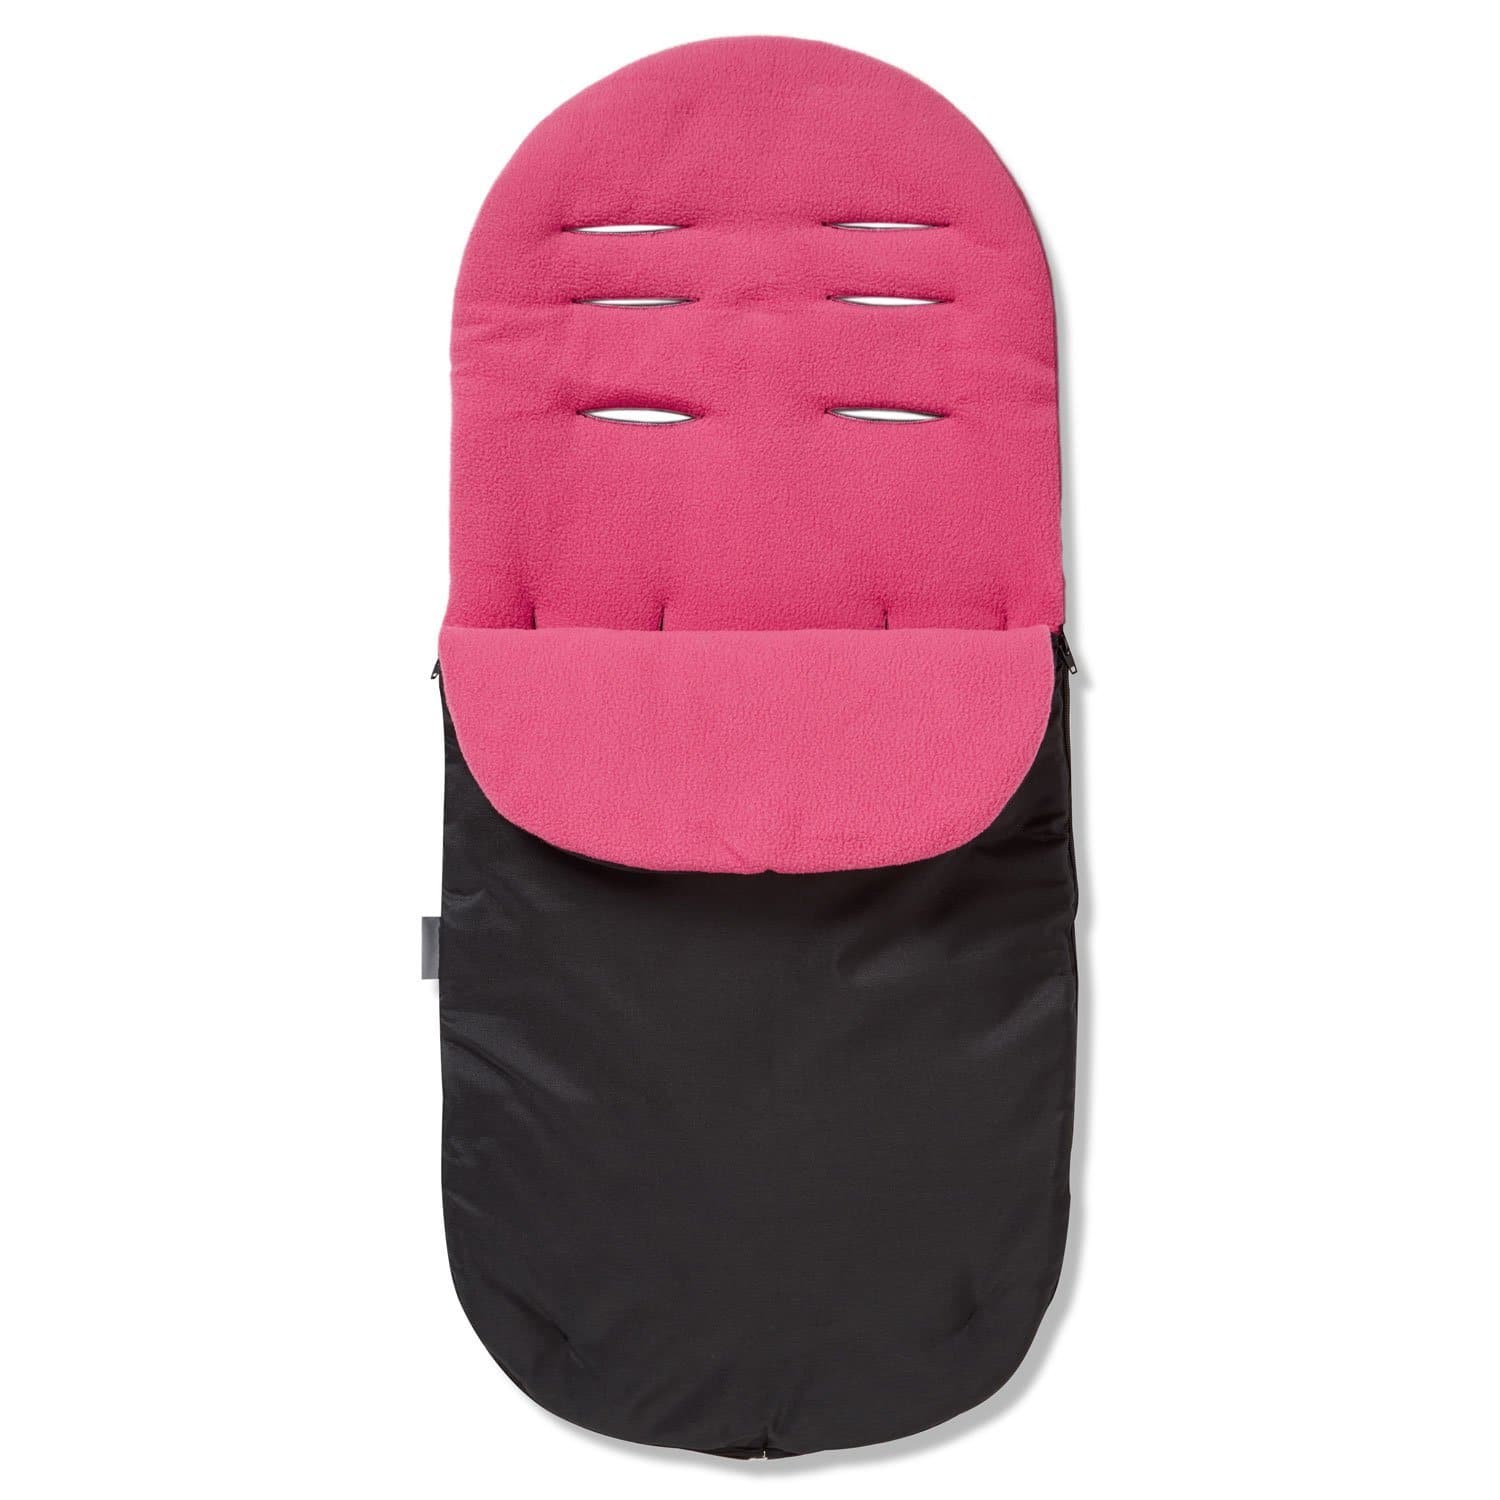 Footmuff / Cosy Toes Compatible with Koelstra - Dark Pink / Fits All Models | For Your Little One